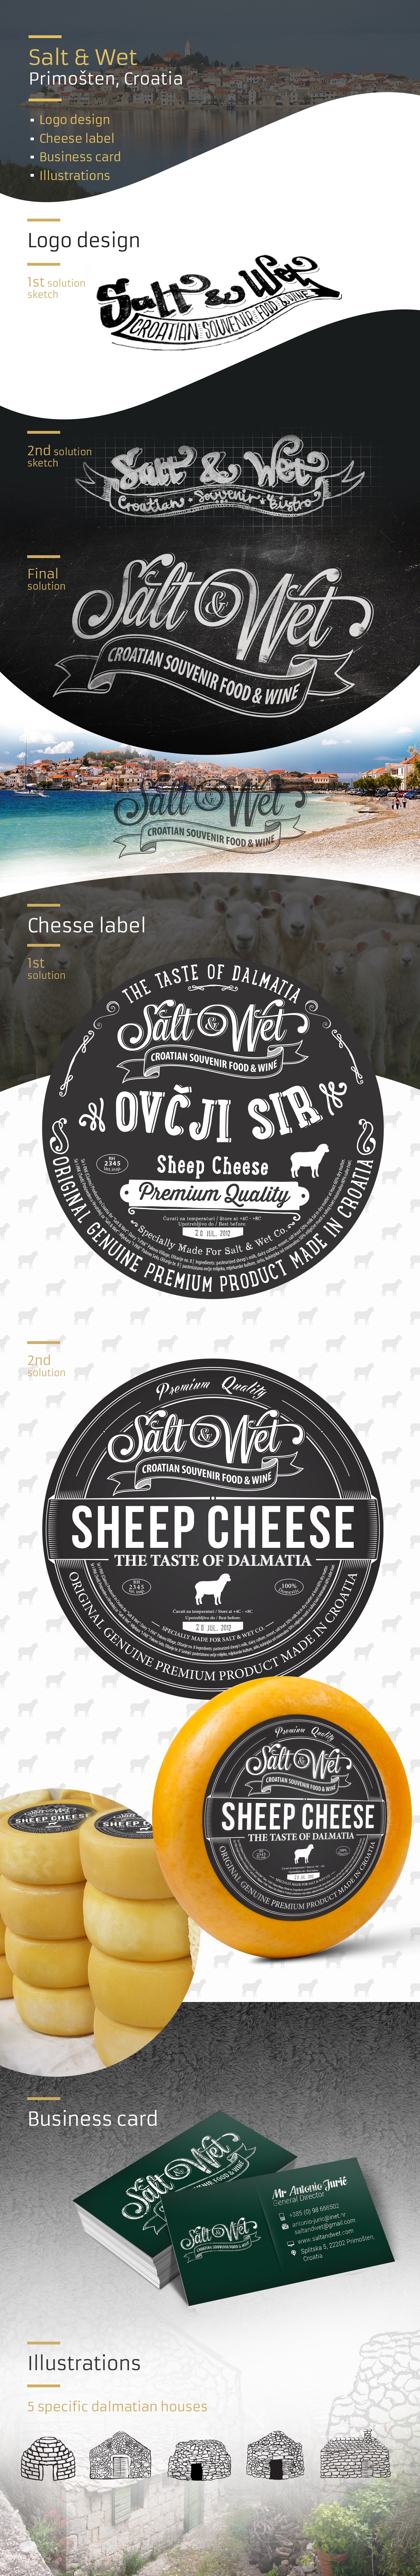 saltandwet chesse label and logo